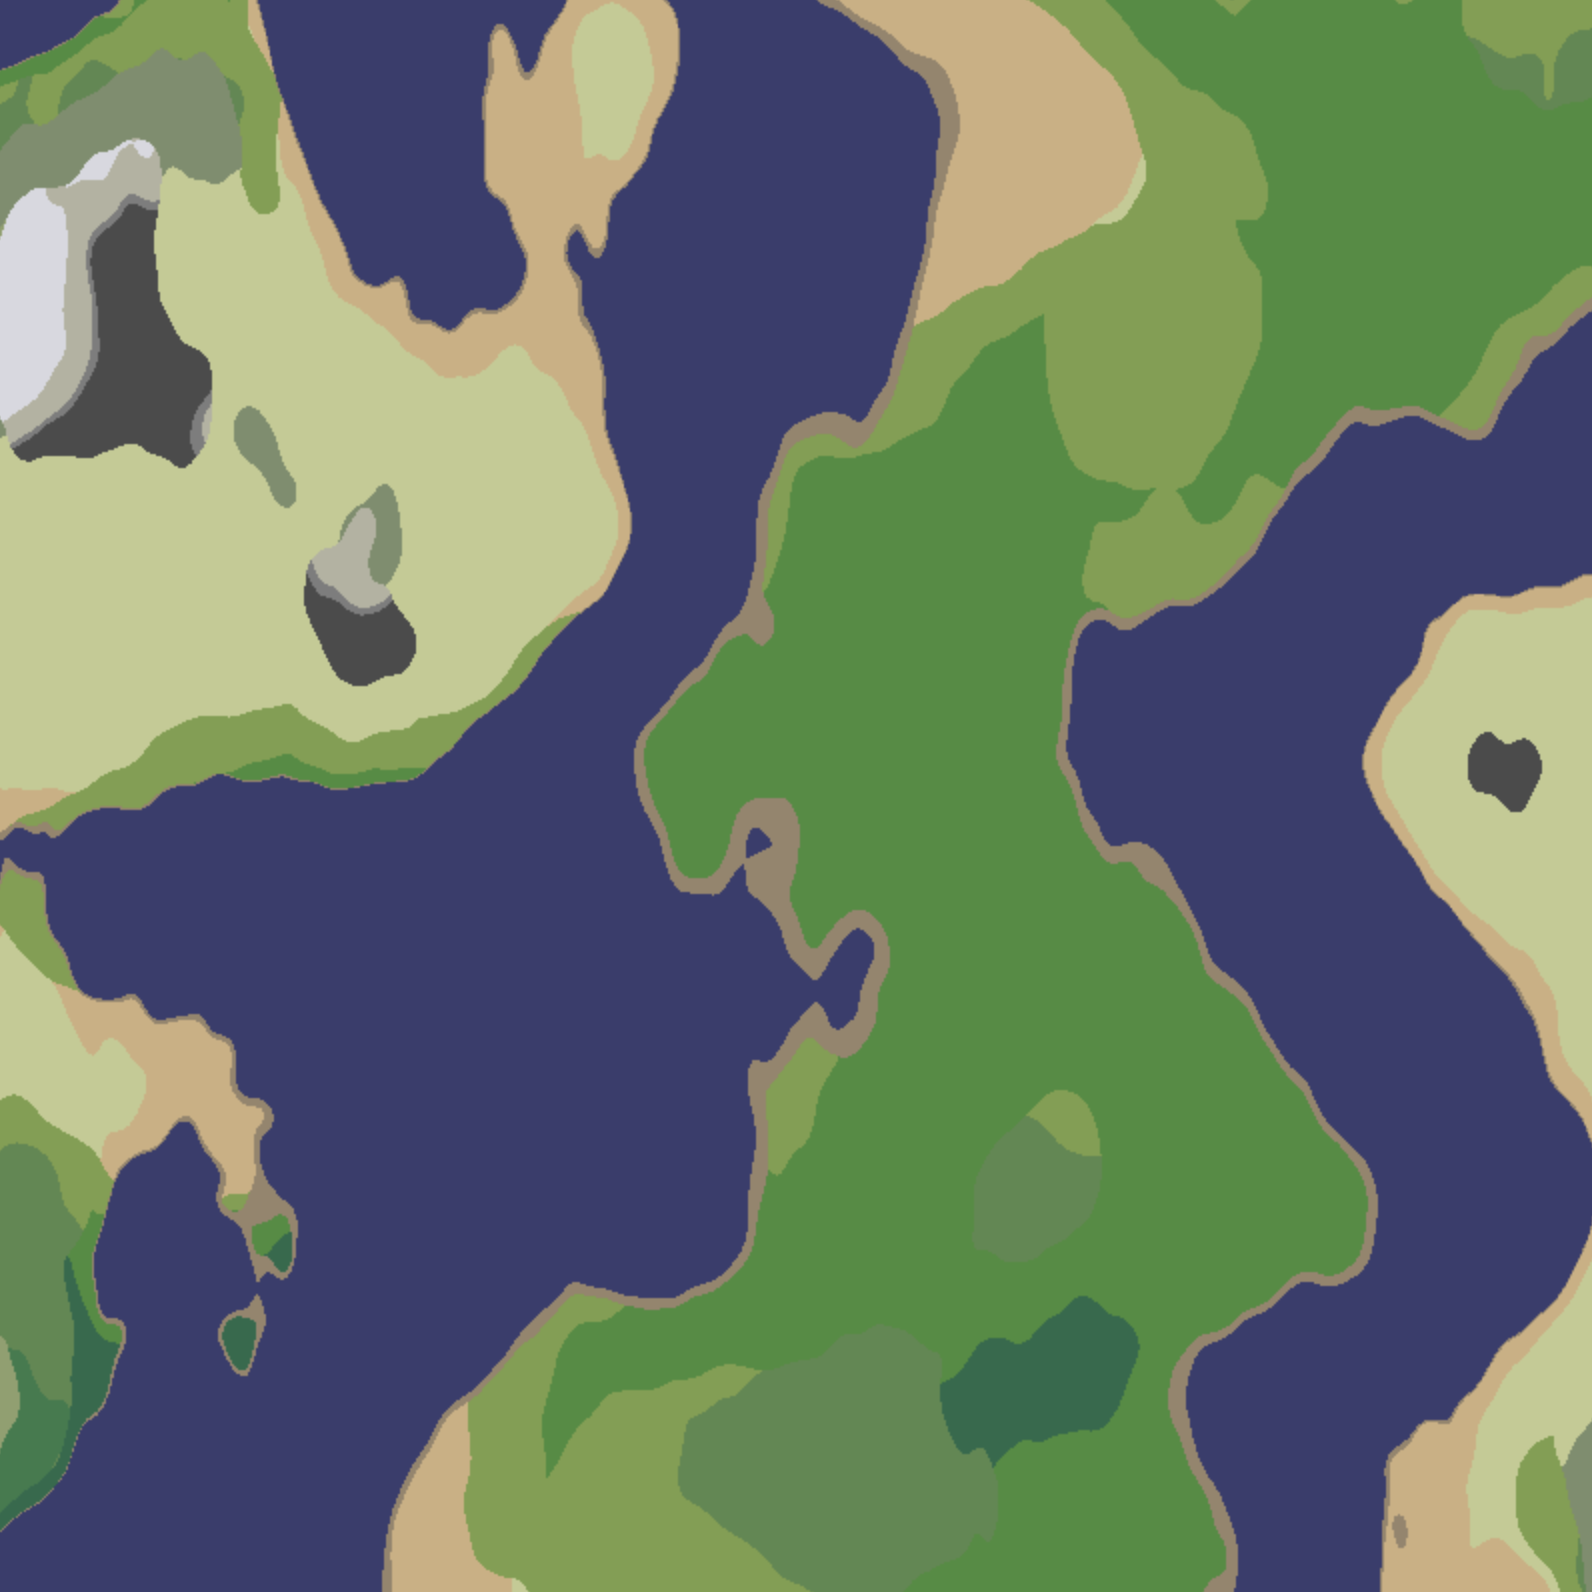 An example of the randomly generated landmasses this project creates.